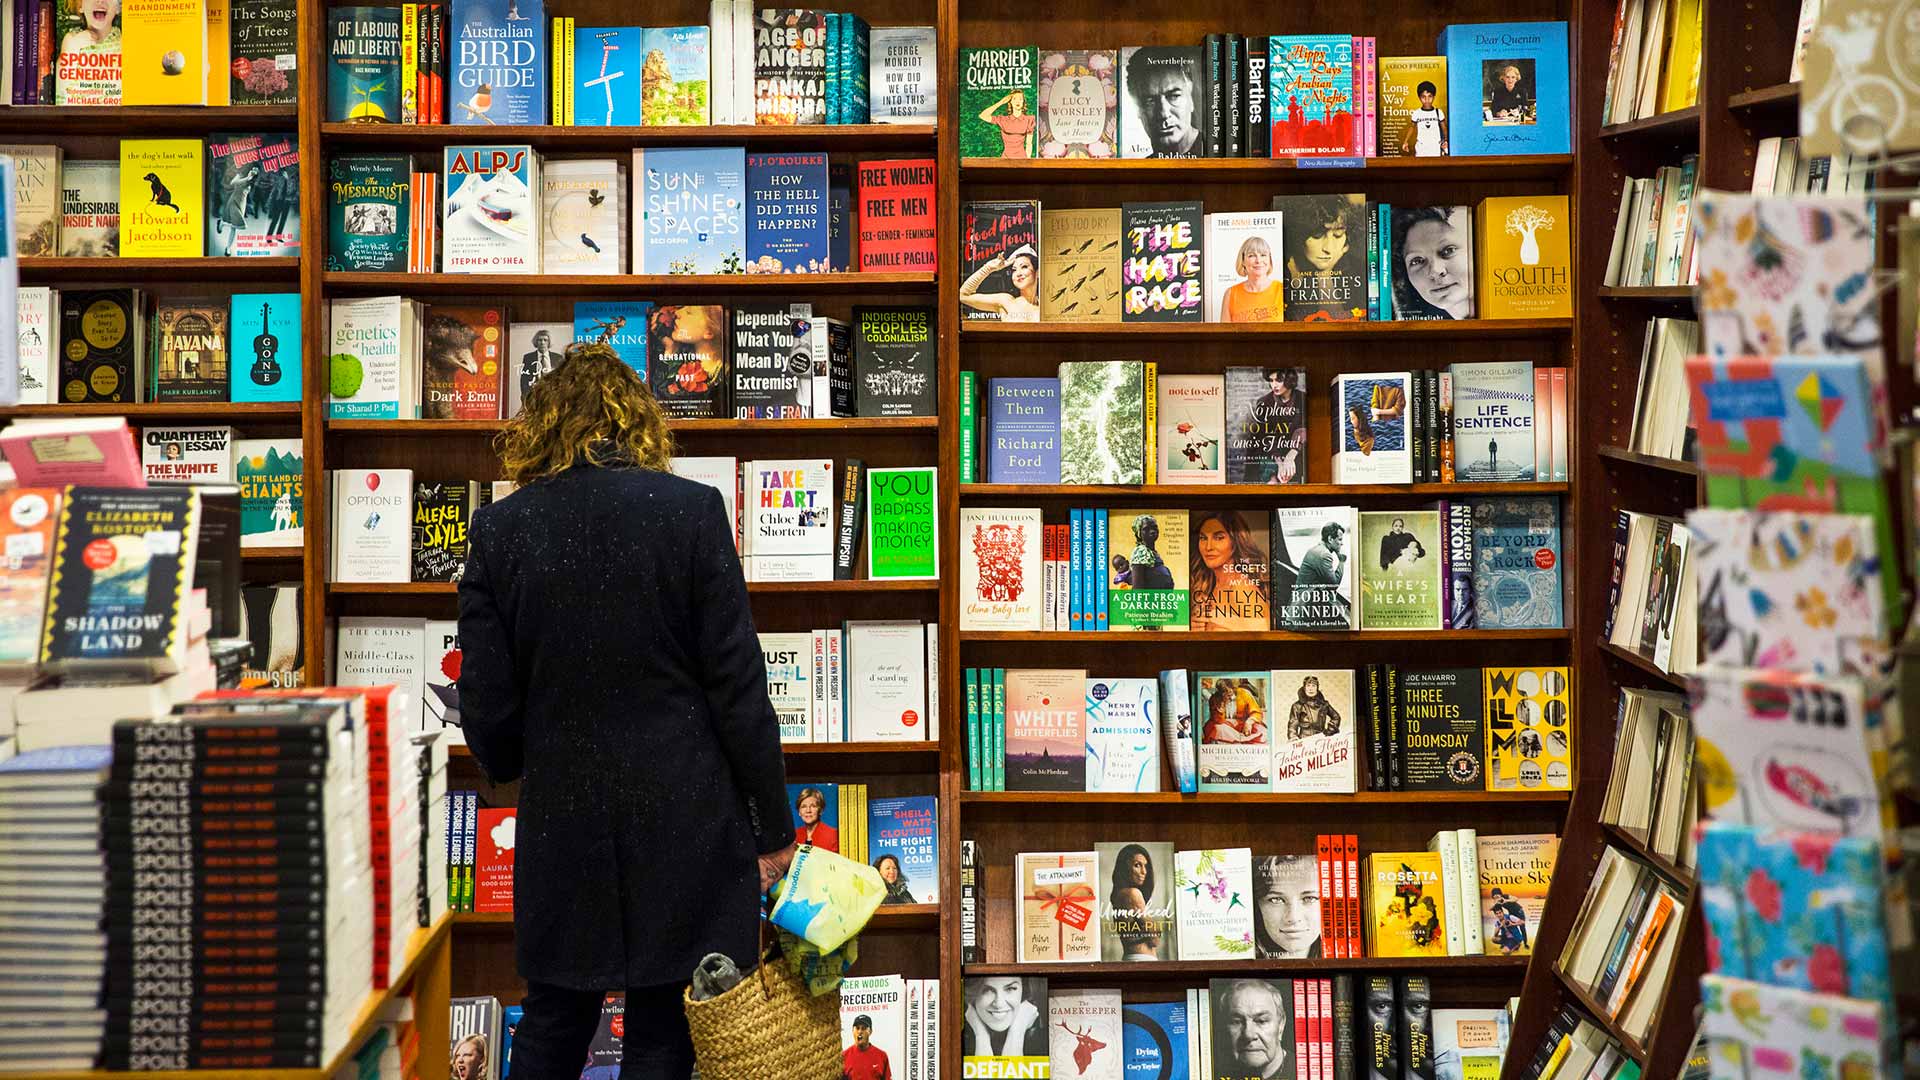 The Best Books to Keep You Entertained According to Our Writers